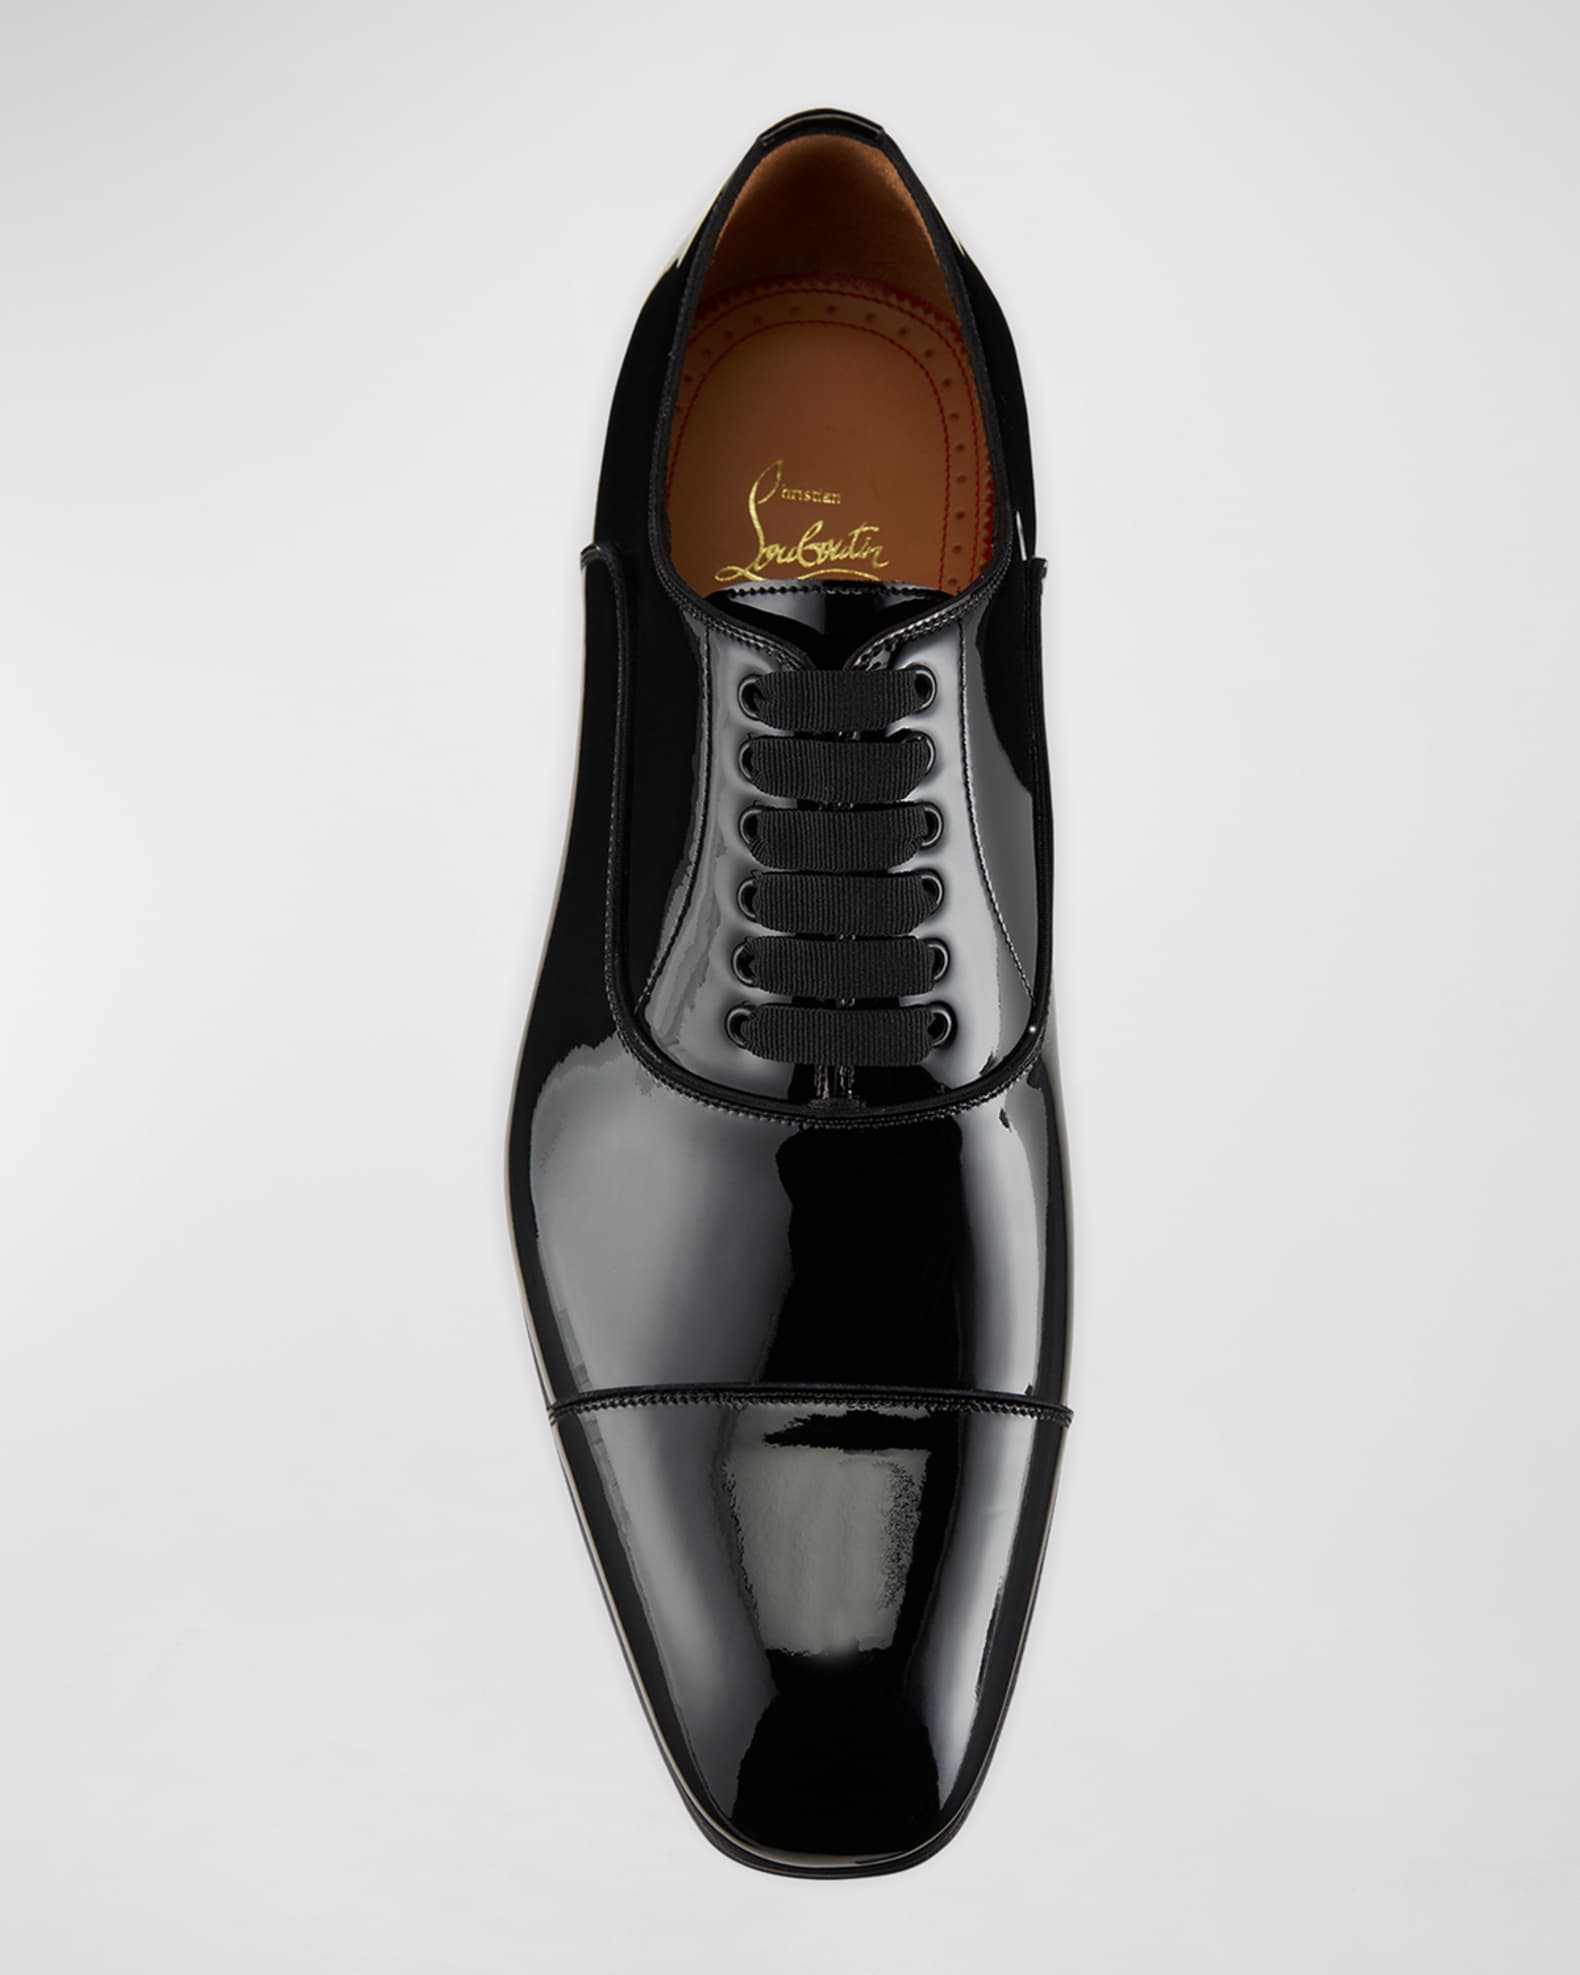 Christian Louboutin Men's Greg on Patent Leather Loafers